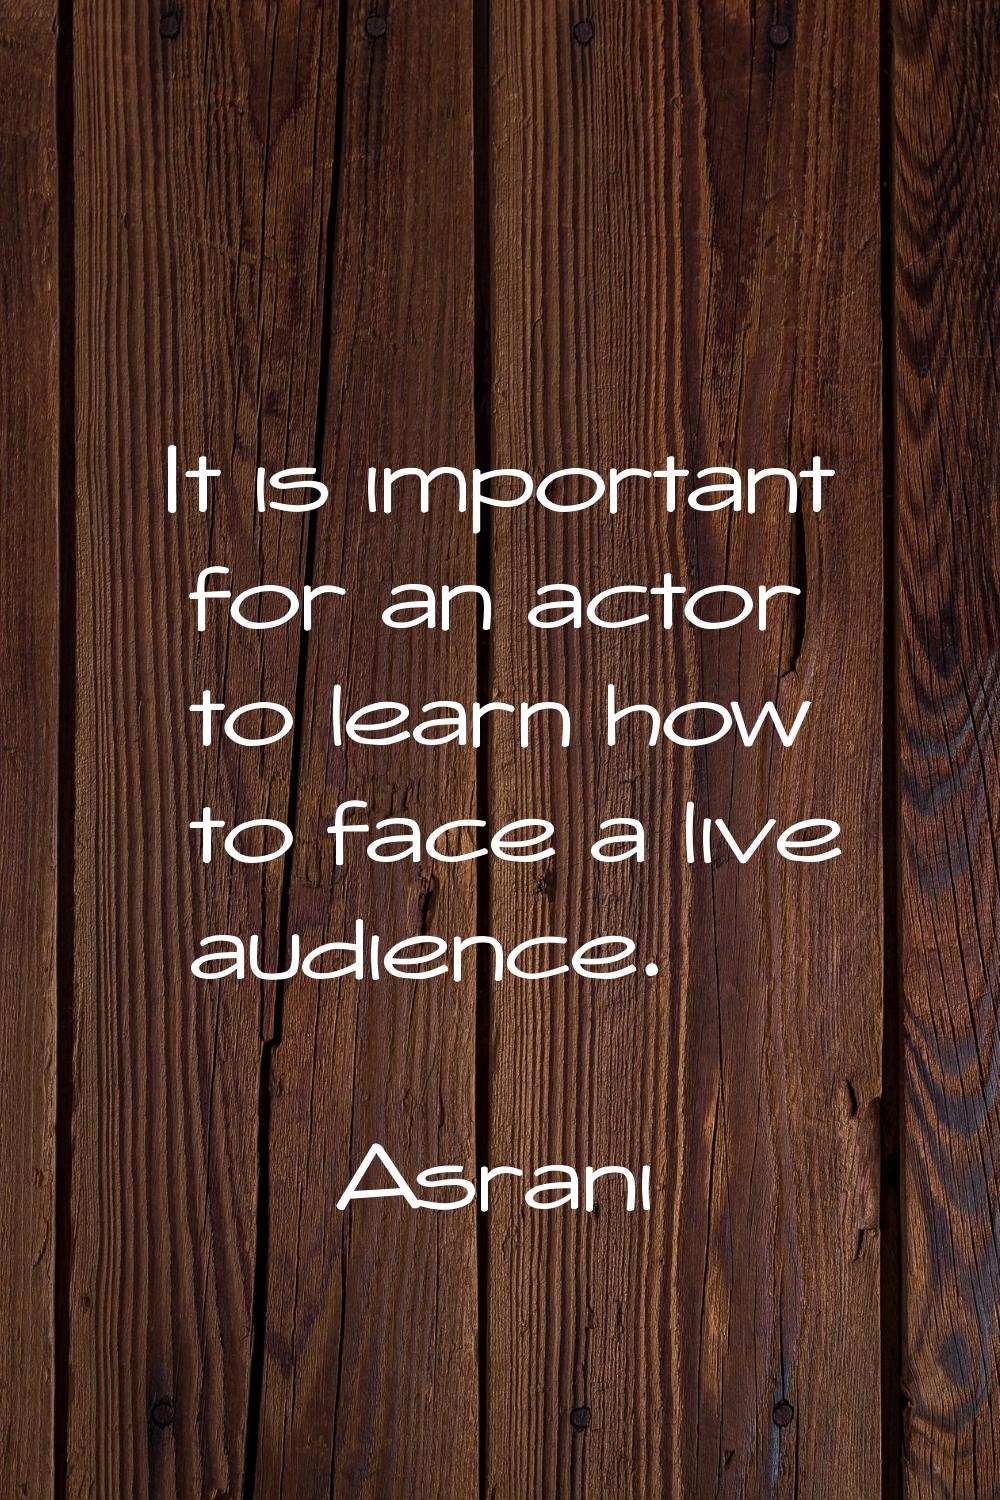 It is important for an actor to learn how to face a live audience.